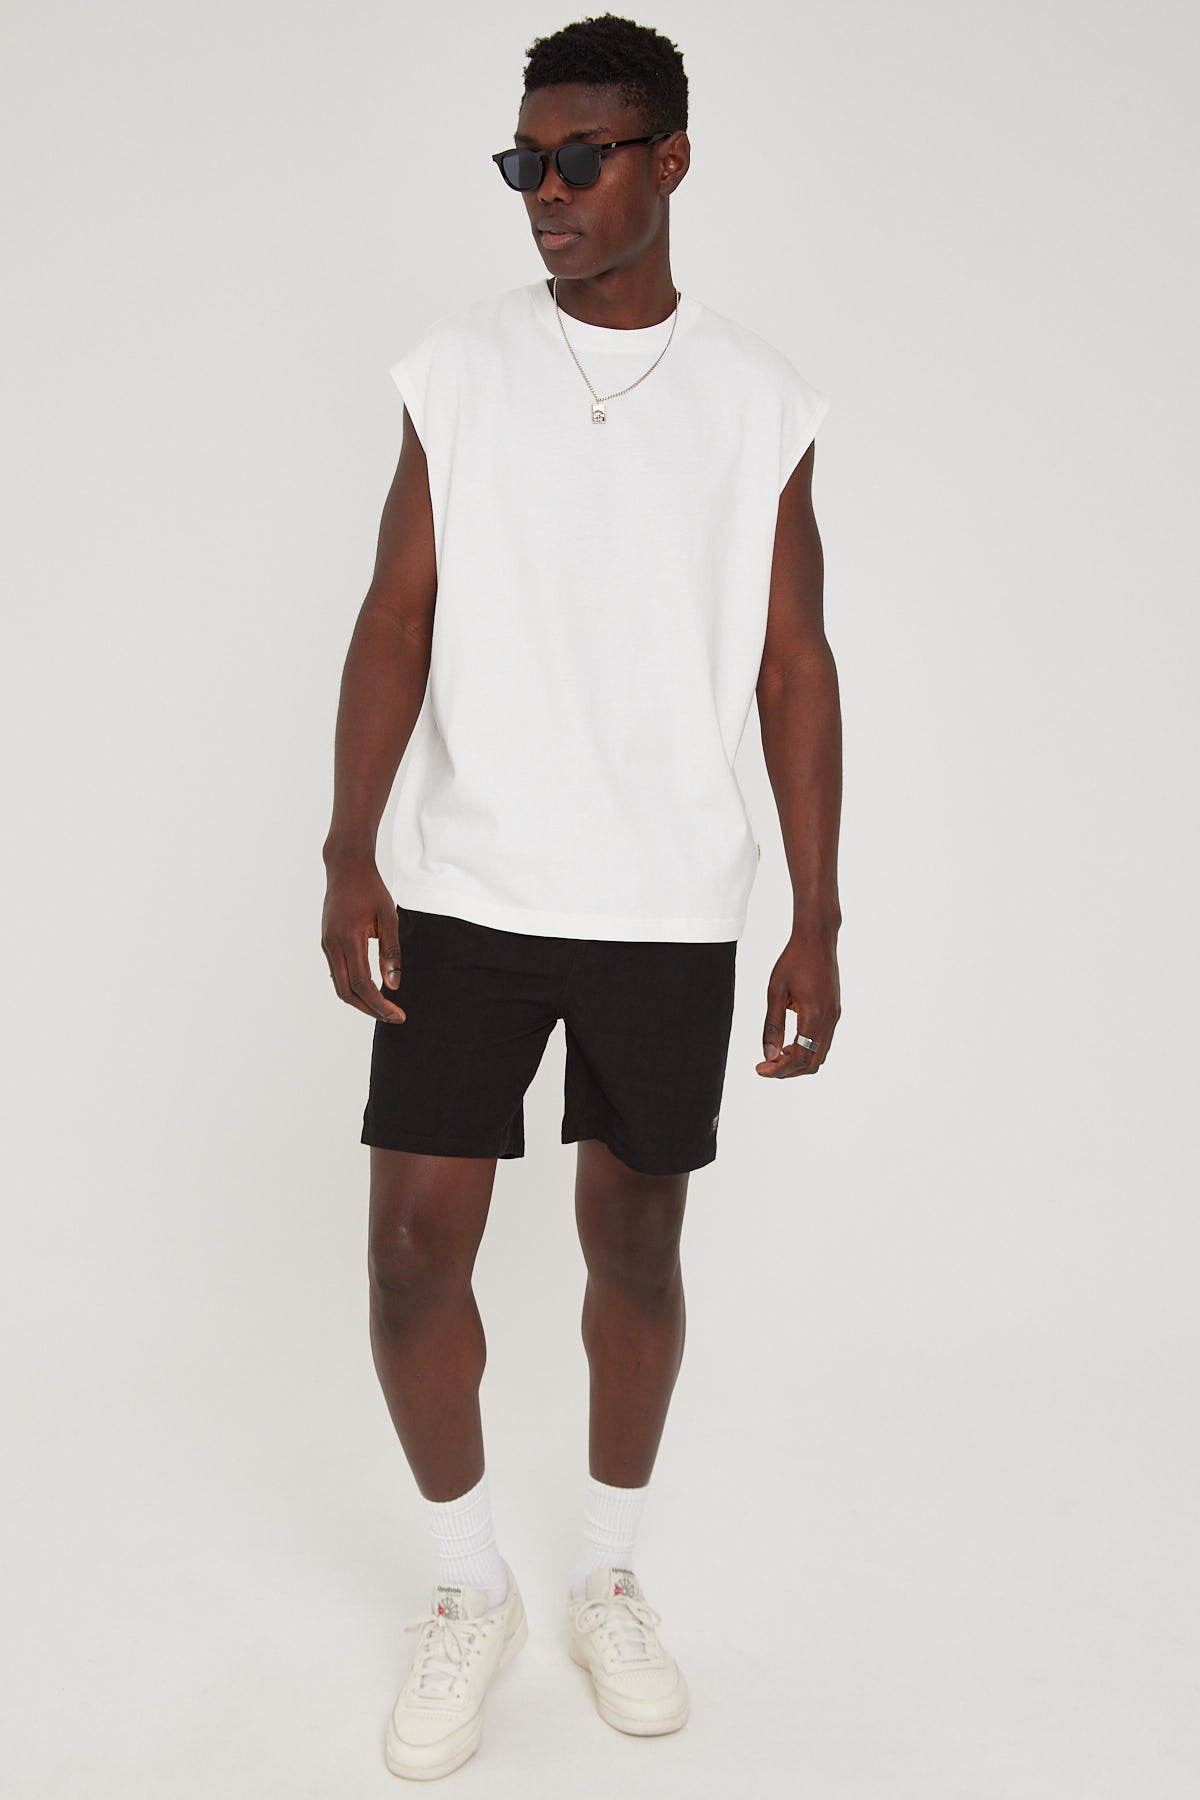 Common Need Brushed Cotton Muscle Tank Off White